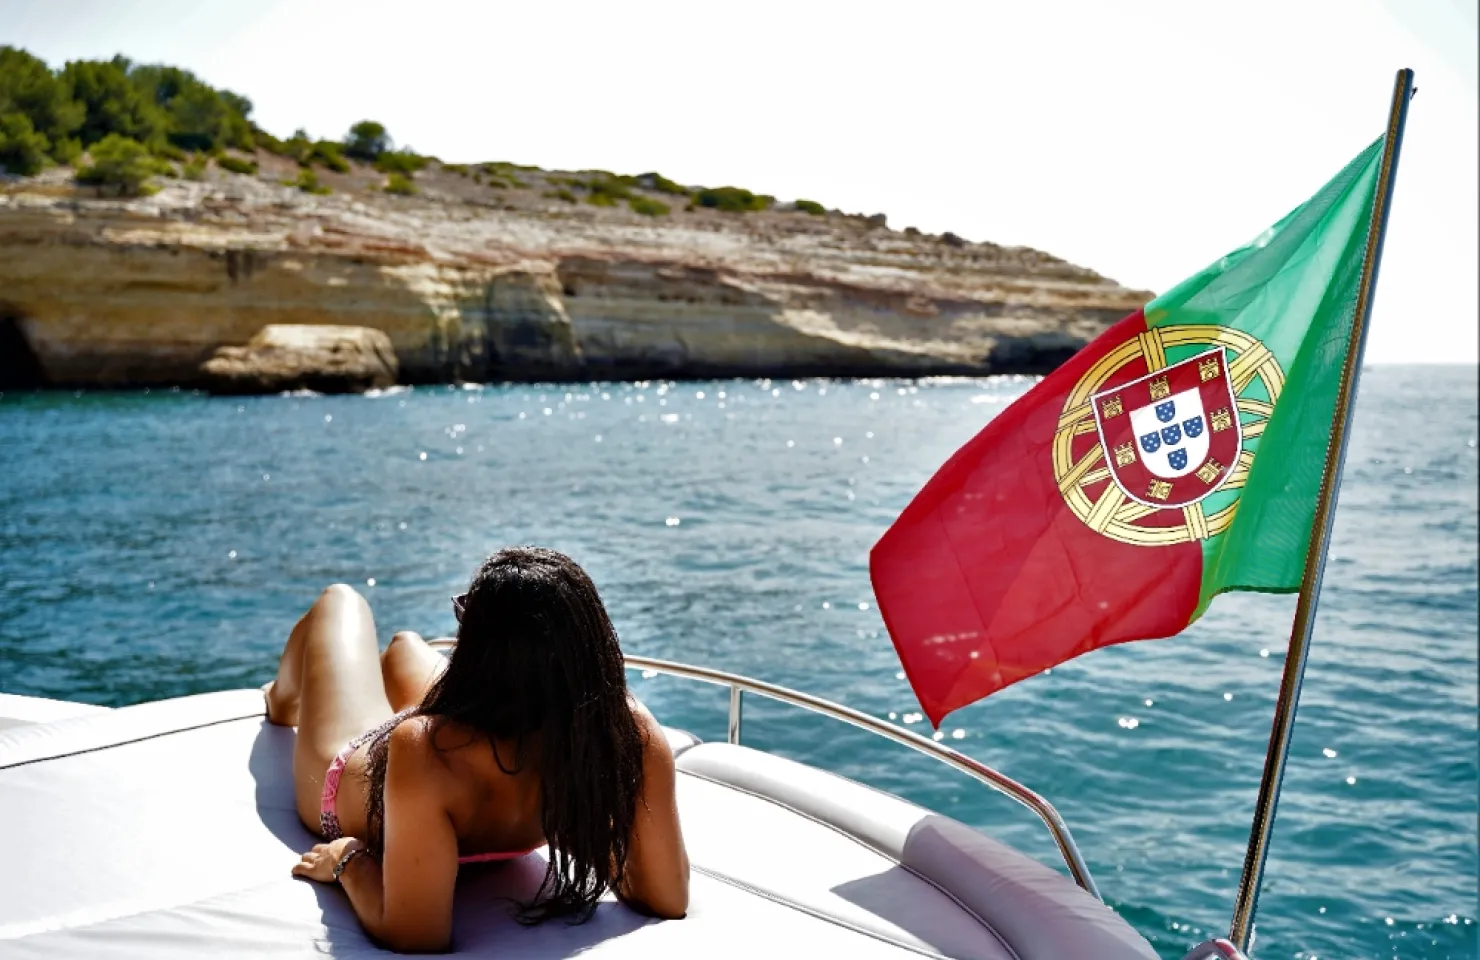 Full Day Luxury Yacht Charter - Vilamoura things to do